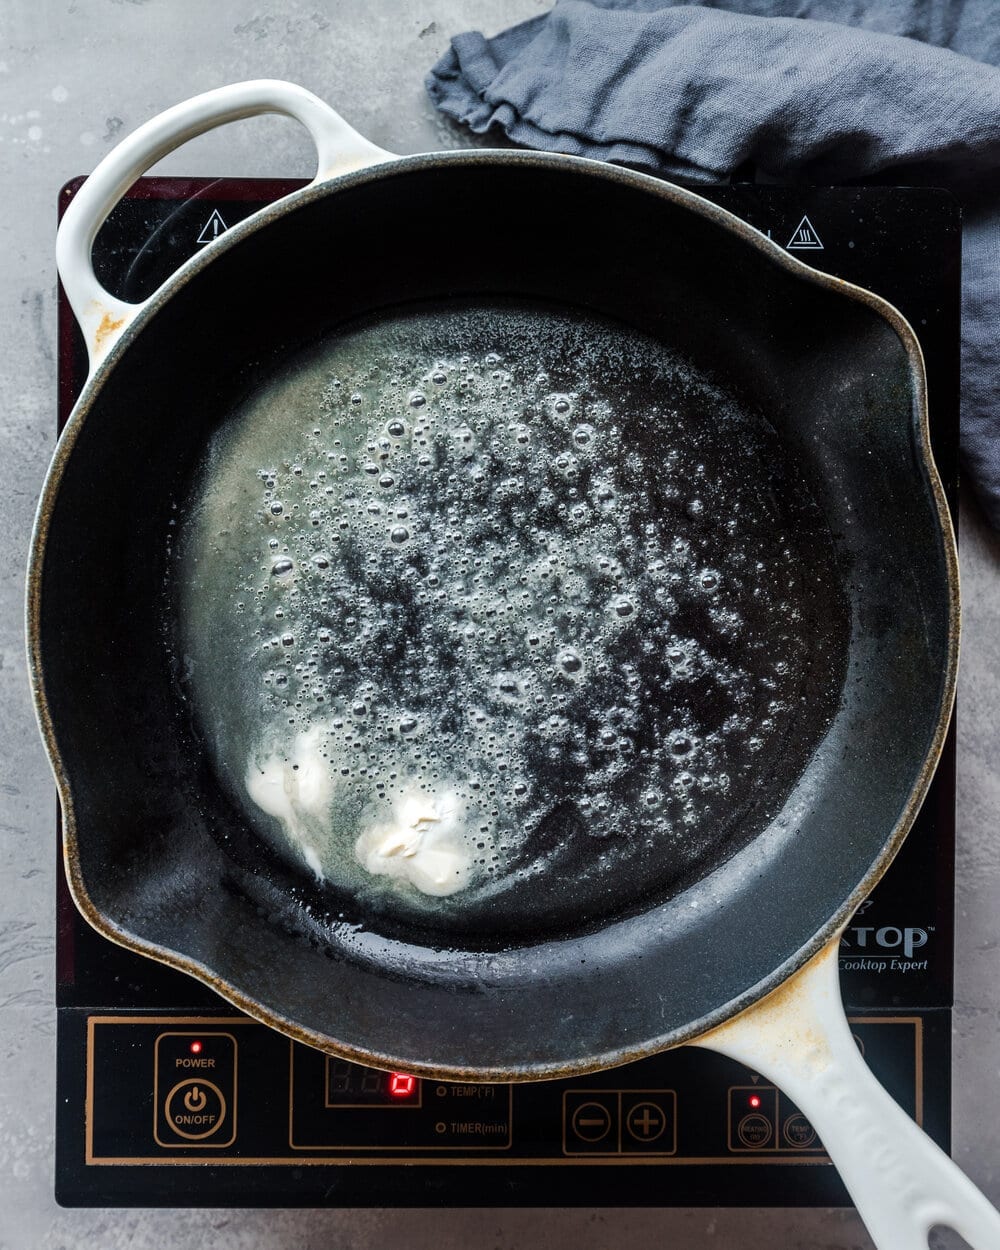 Butter melted in a hot skillet.